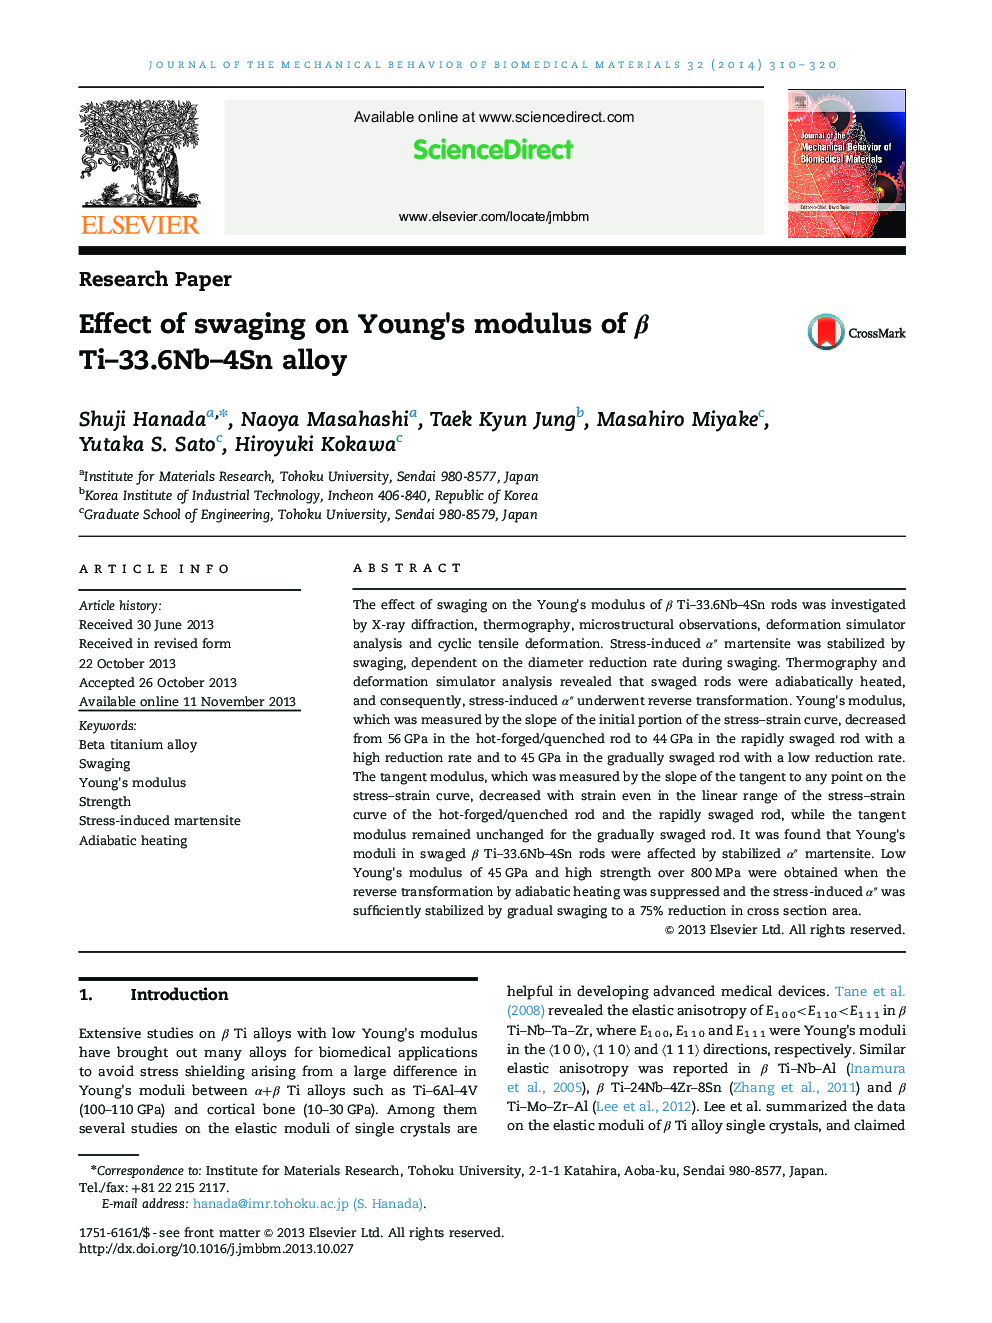 Effect of swaging on Young×³s modulus of Î² Ti-33.6Nb-4Sn alloy